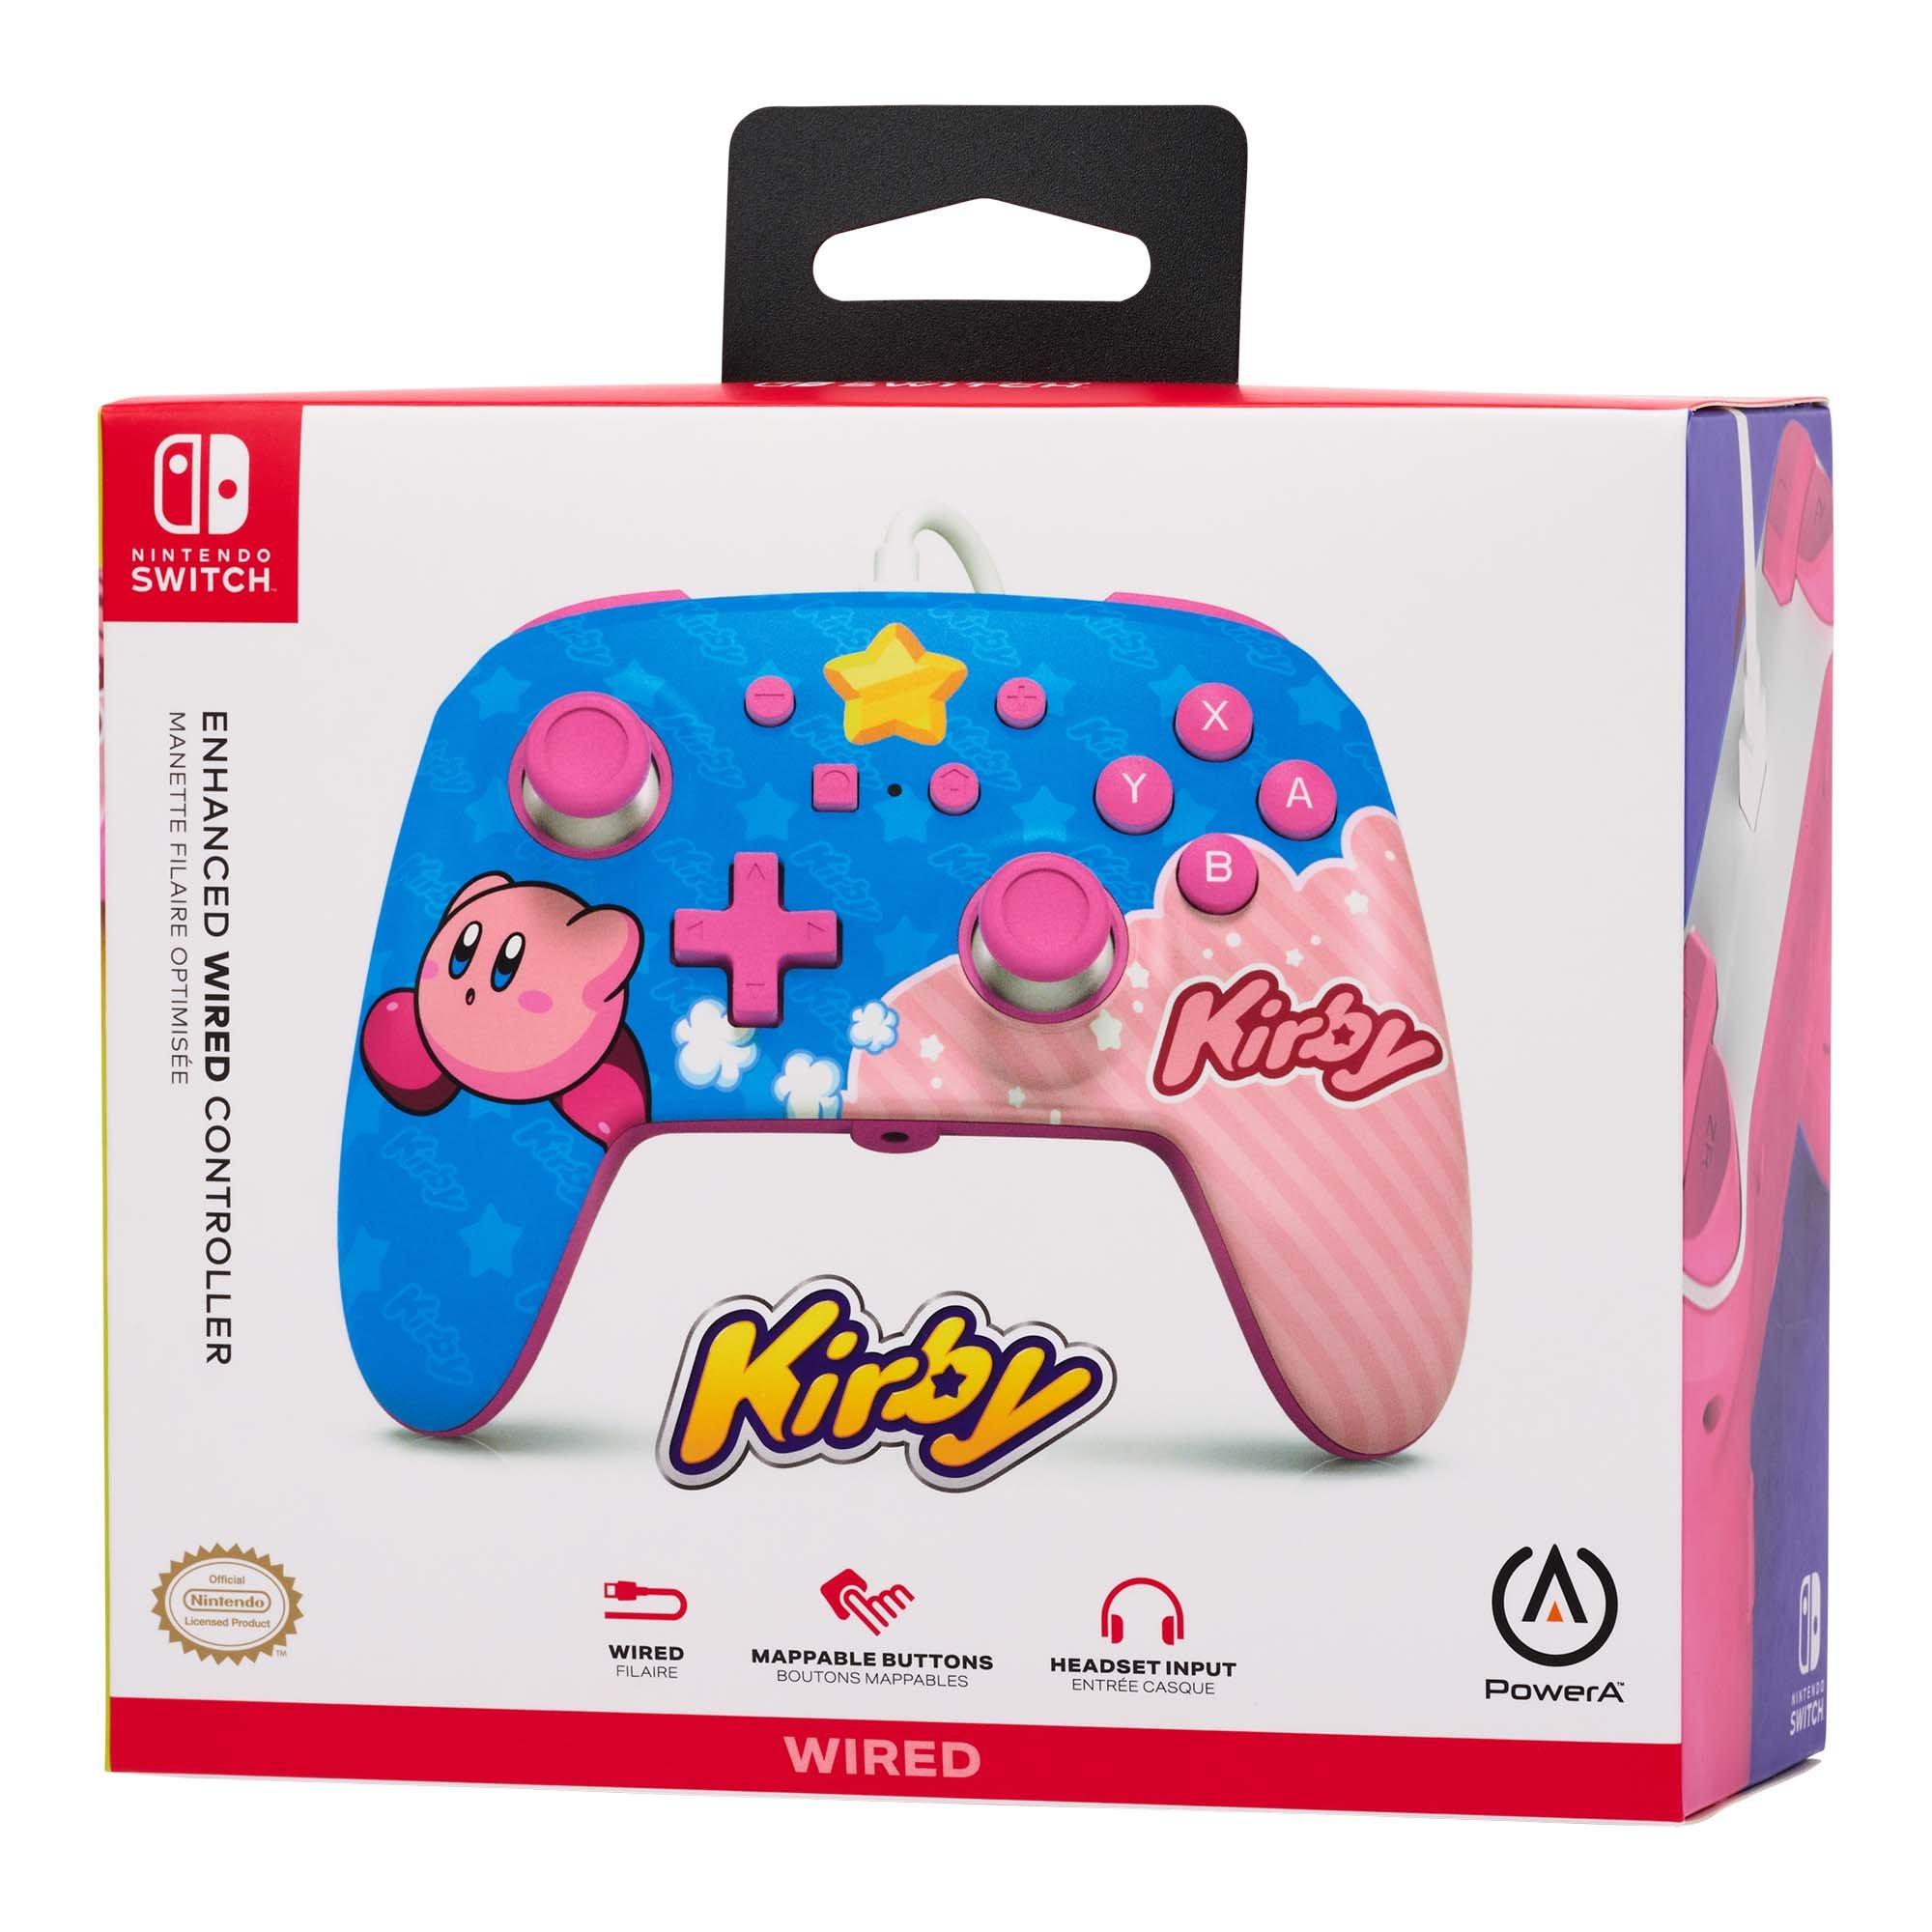 PowerA Enhanced Wired Controller for Nintendo Switch - Kirby | GameStop